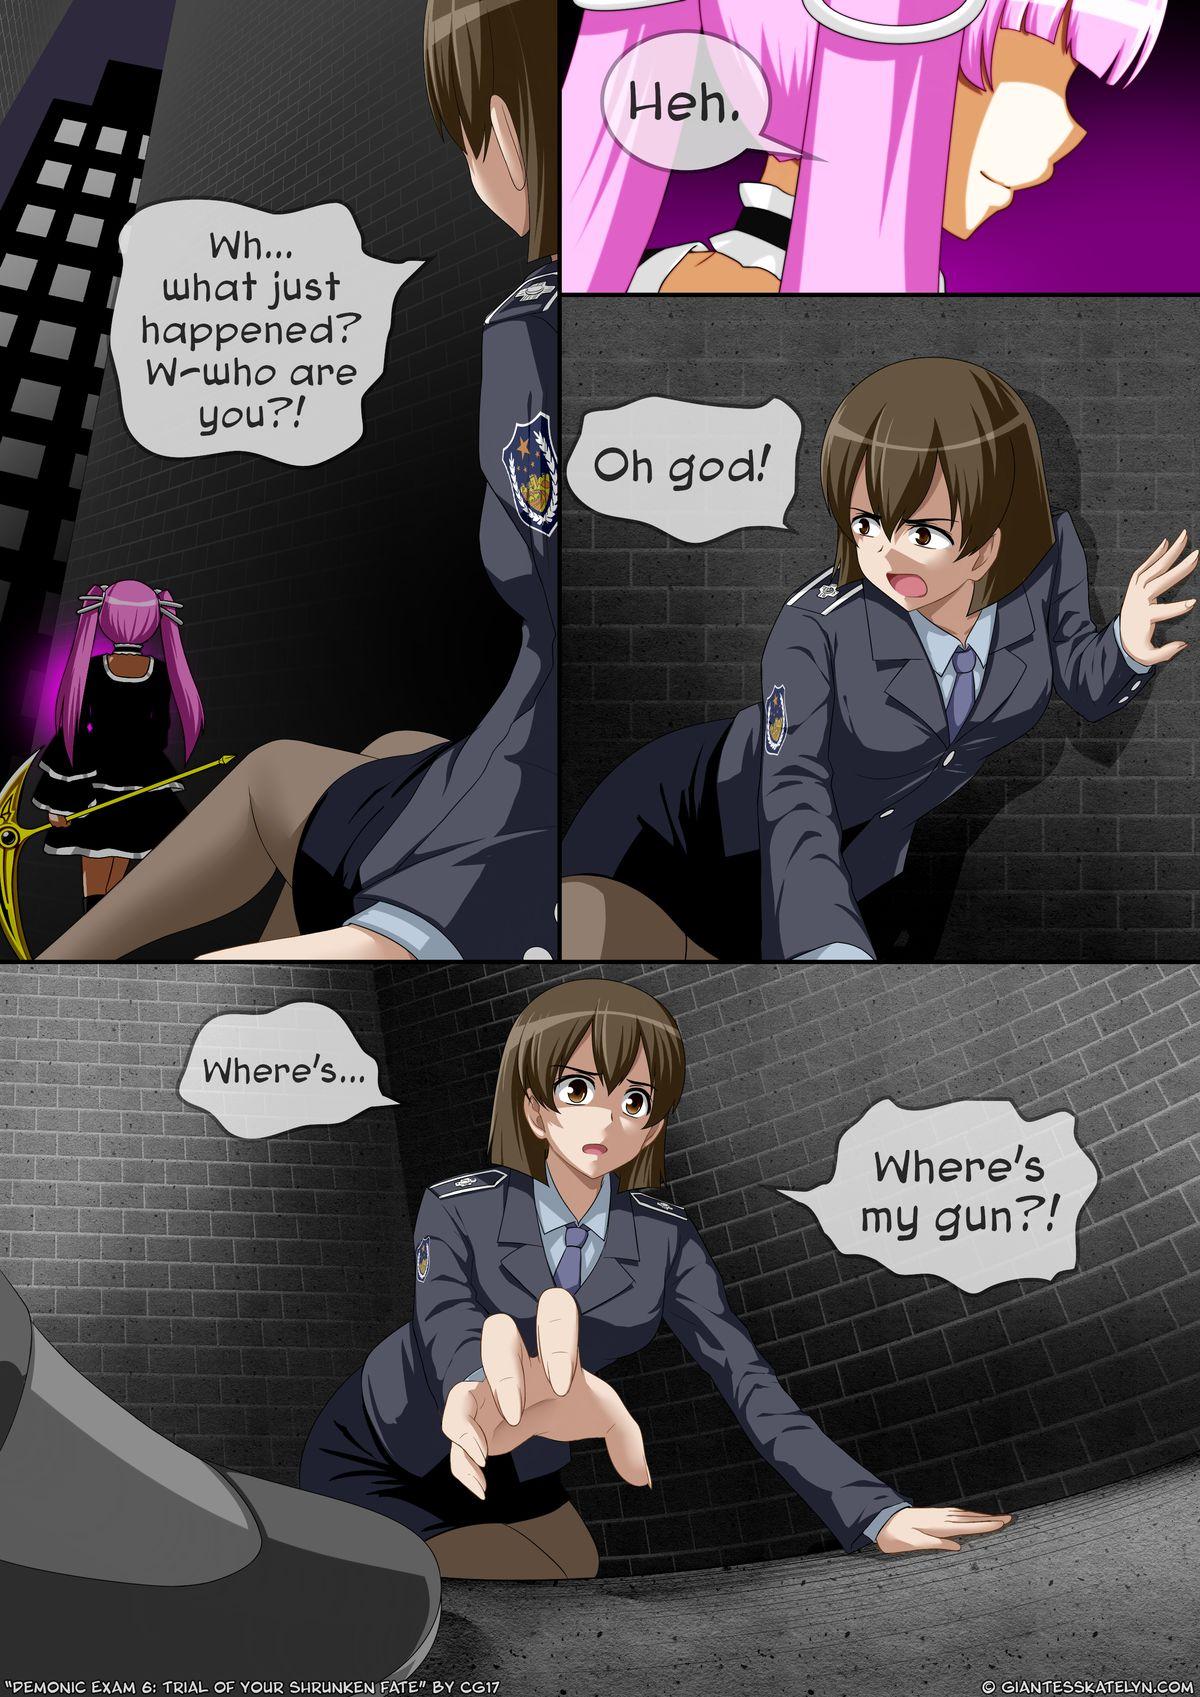 Made Demonic Exam 6: Trial of your Shrunken Fate Mommy - Page 4